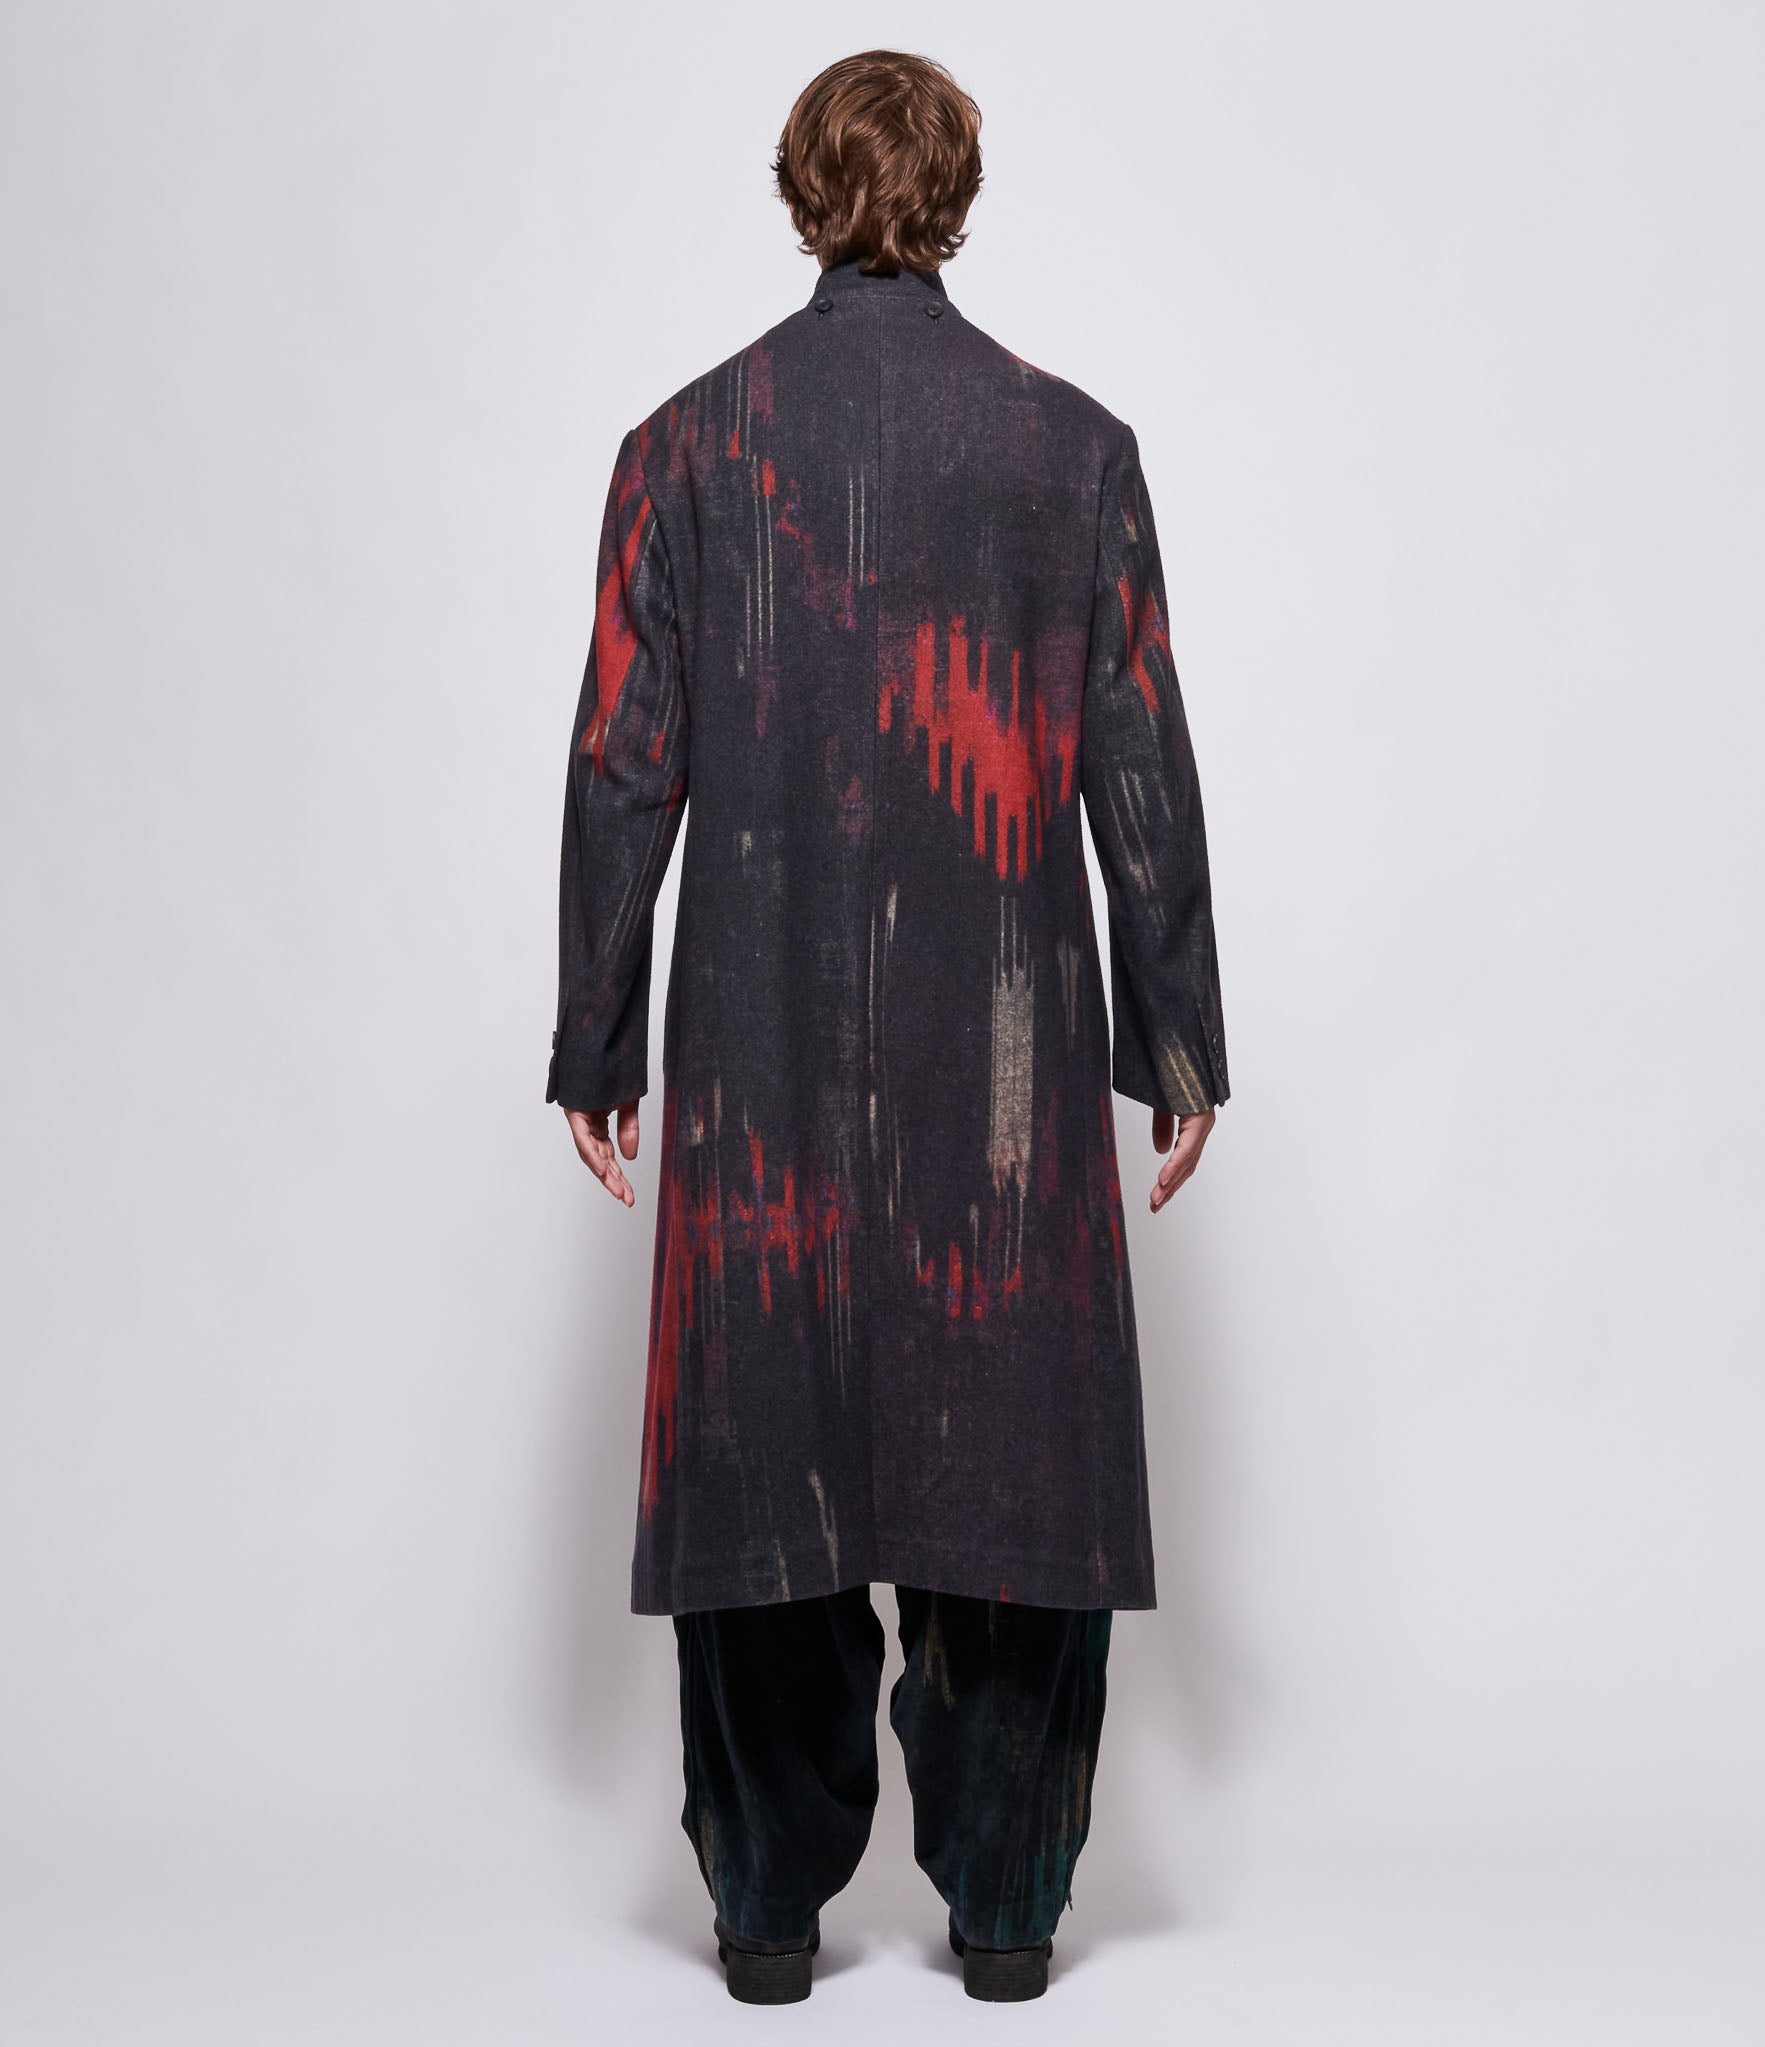 Yohji Yamamoto Pour Homme I-L Double Layered PT Stand Coat